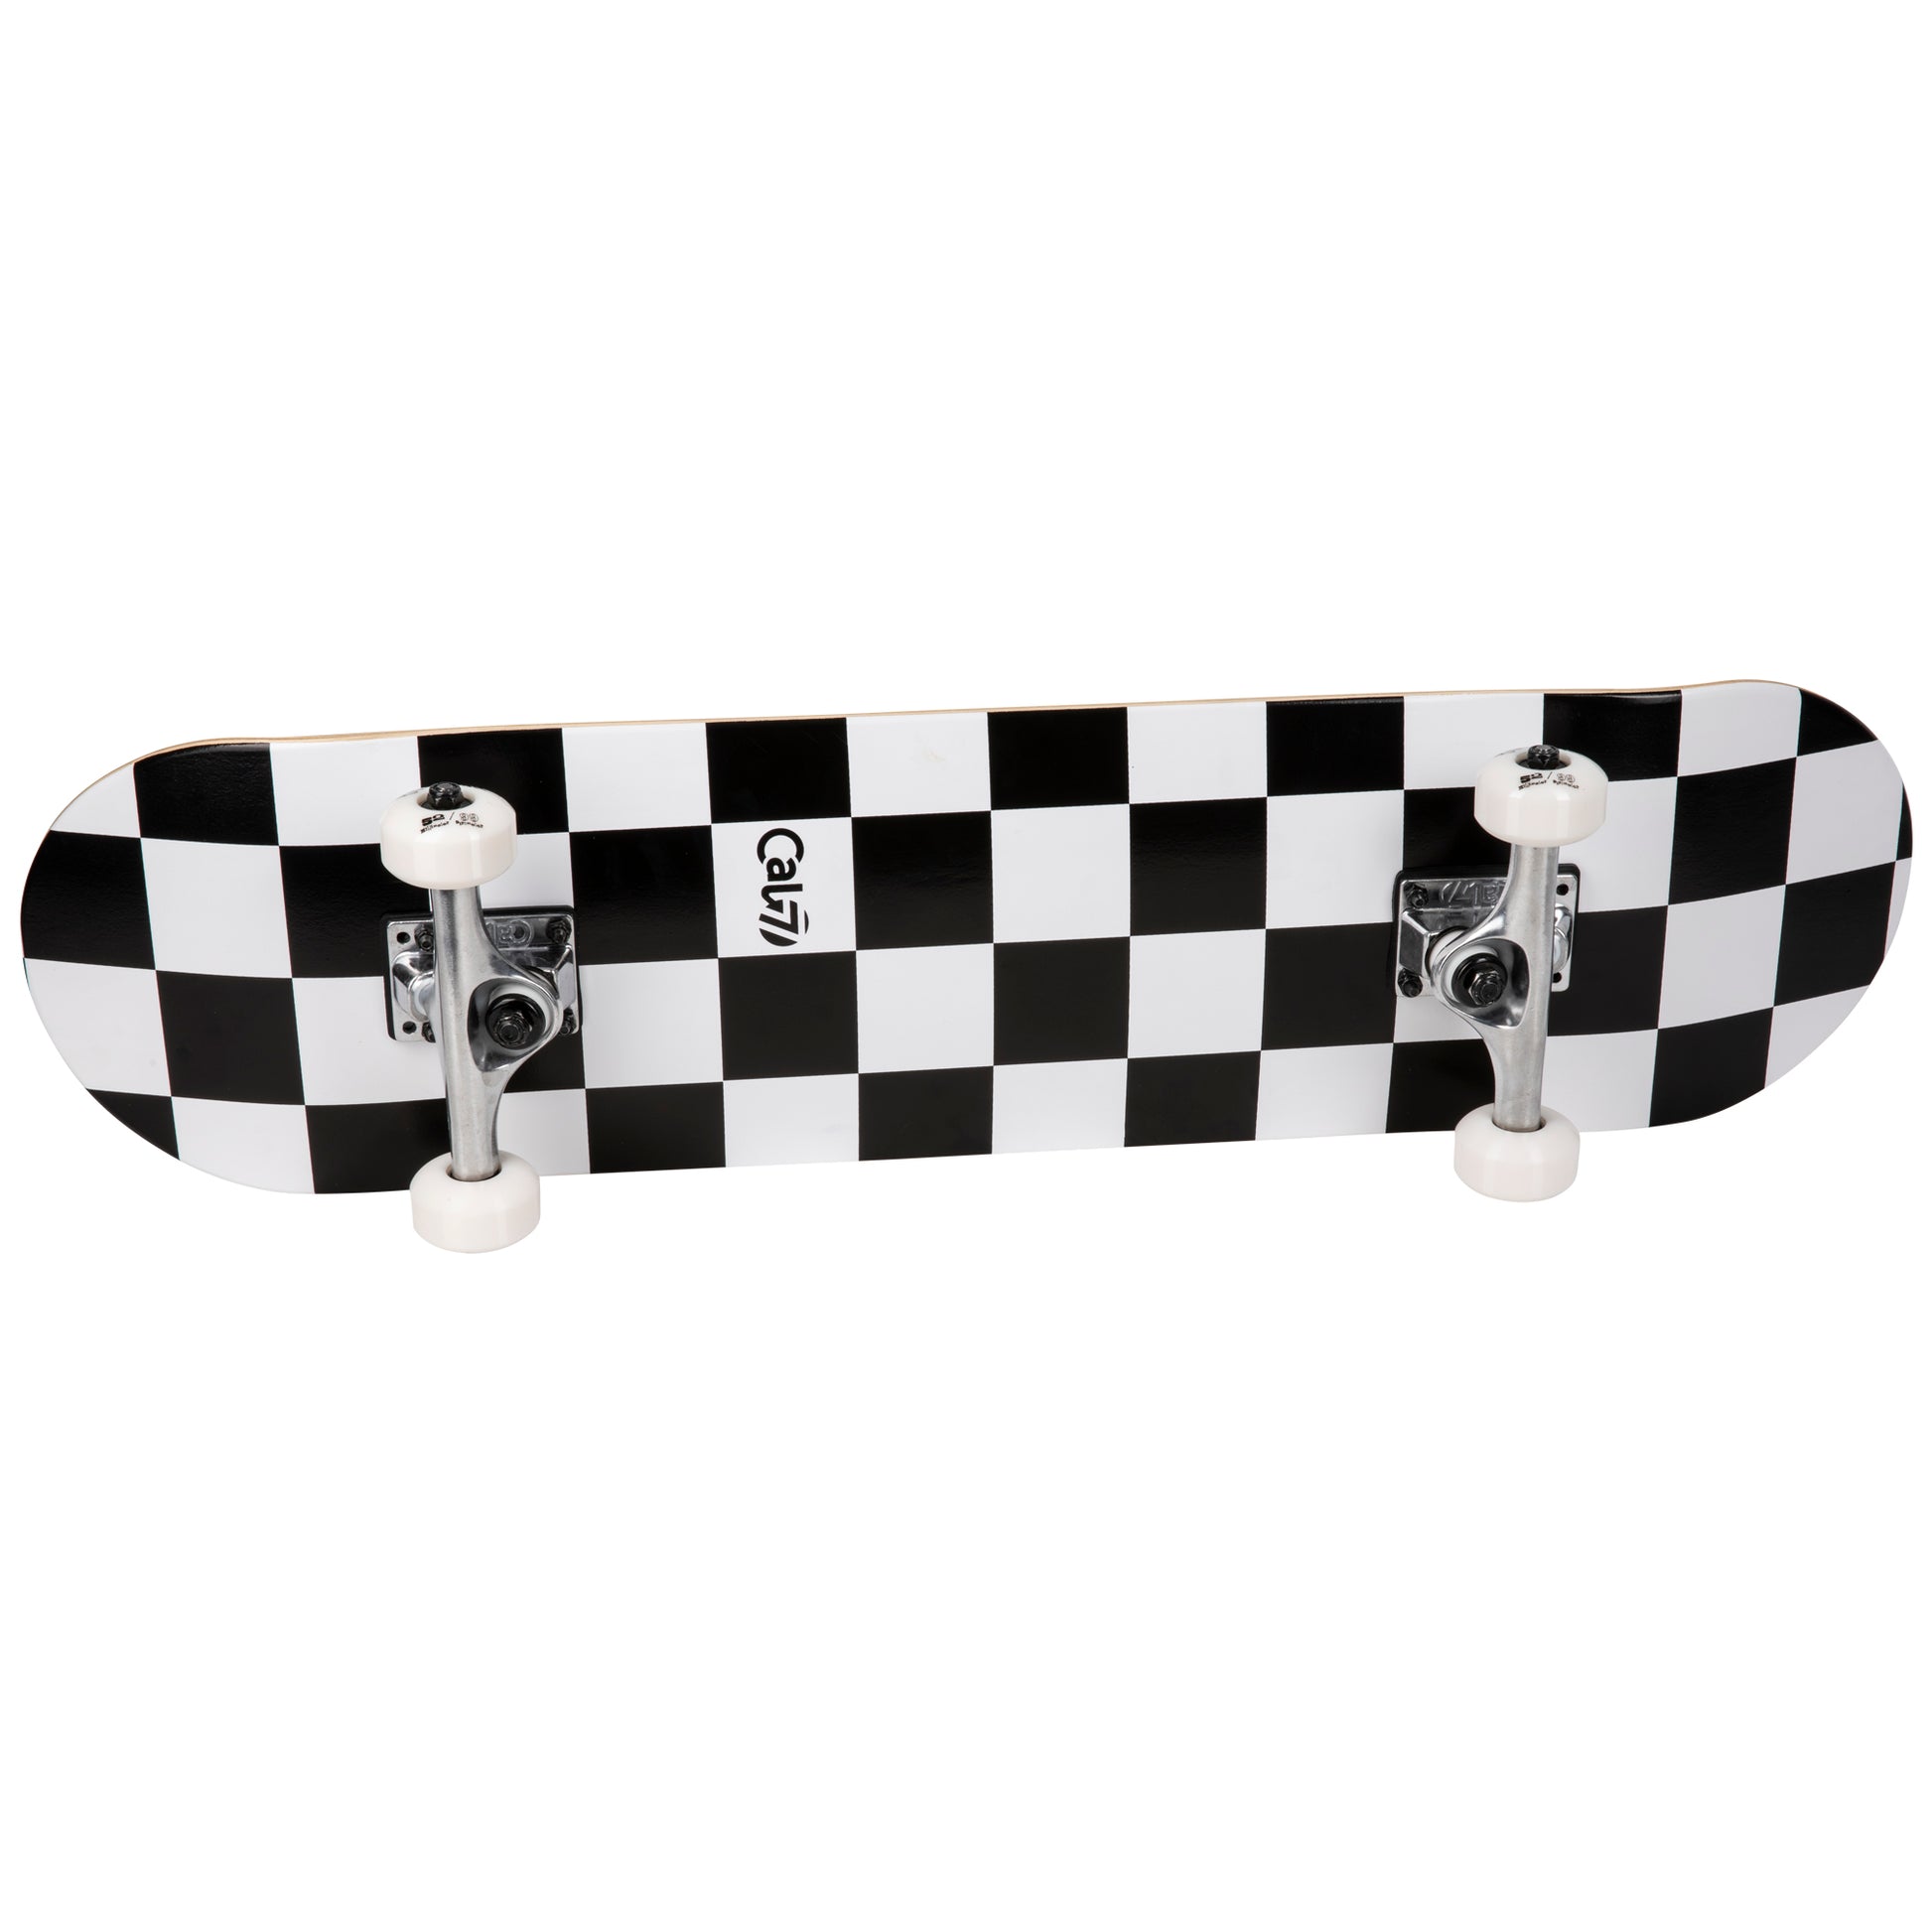 Cal 7 Complete 7.5/7.75/8-Inch Skateboard Checkmate with Check Design